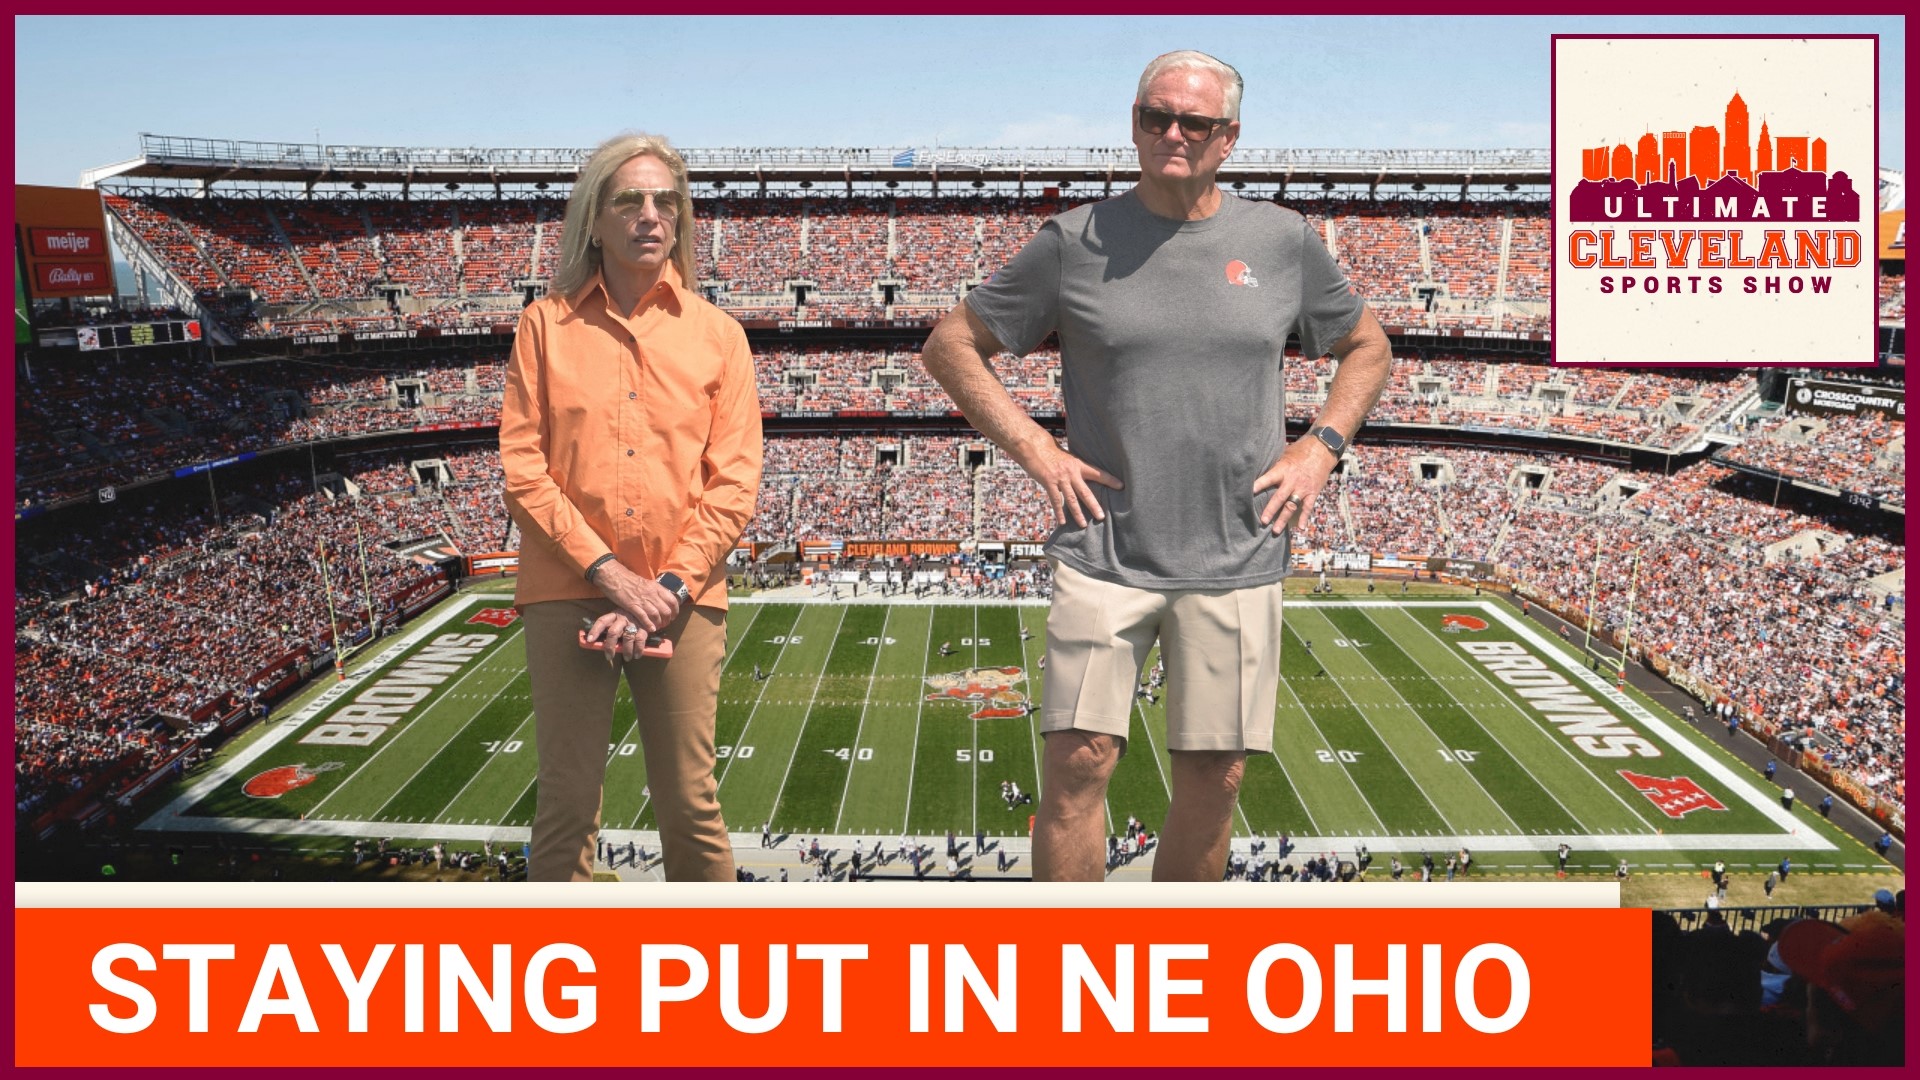 Jimmy Haslam and Dee Haslam interviewed with media yesterday and confirmed that the Cleveland Browns will never leave North East Ohio. However stadium talks are stil